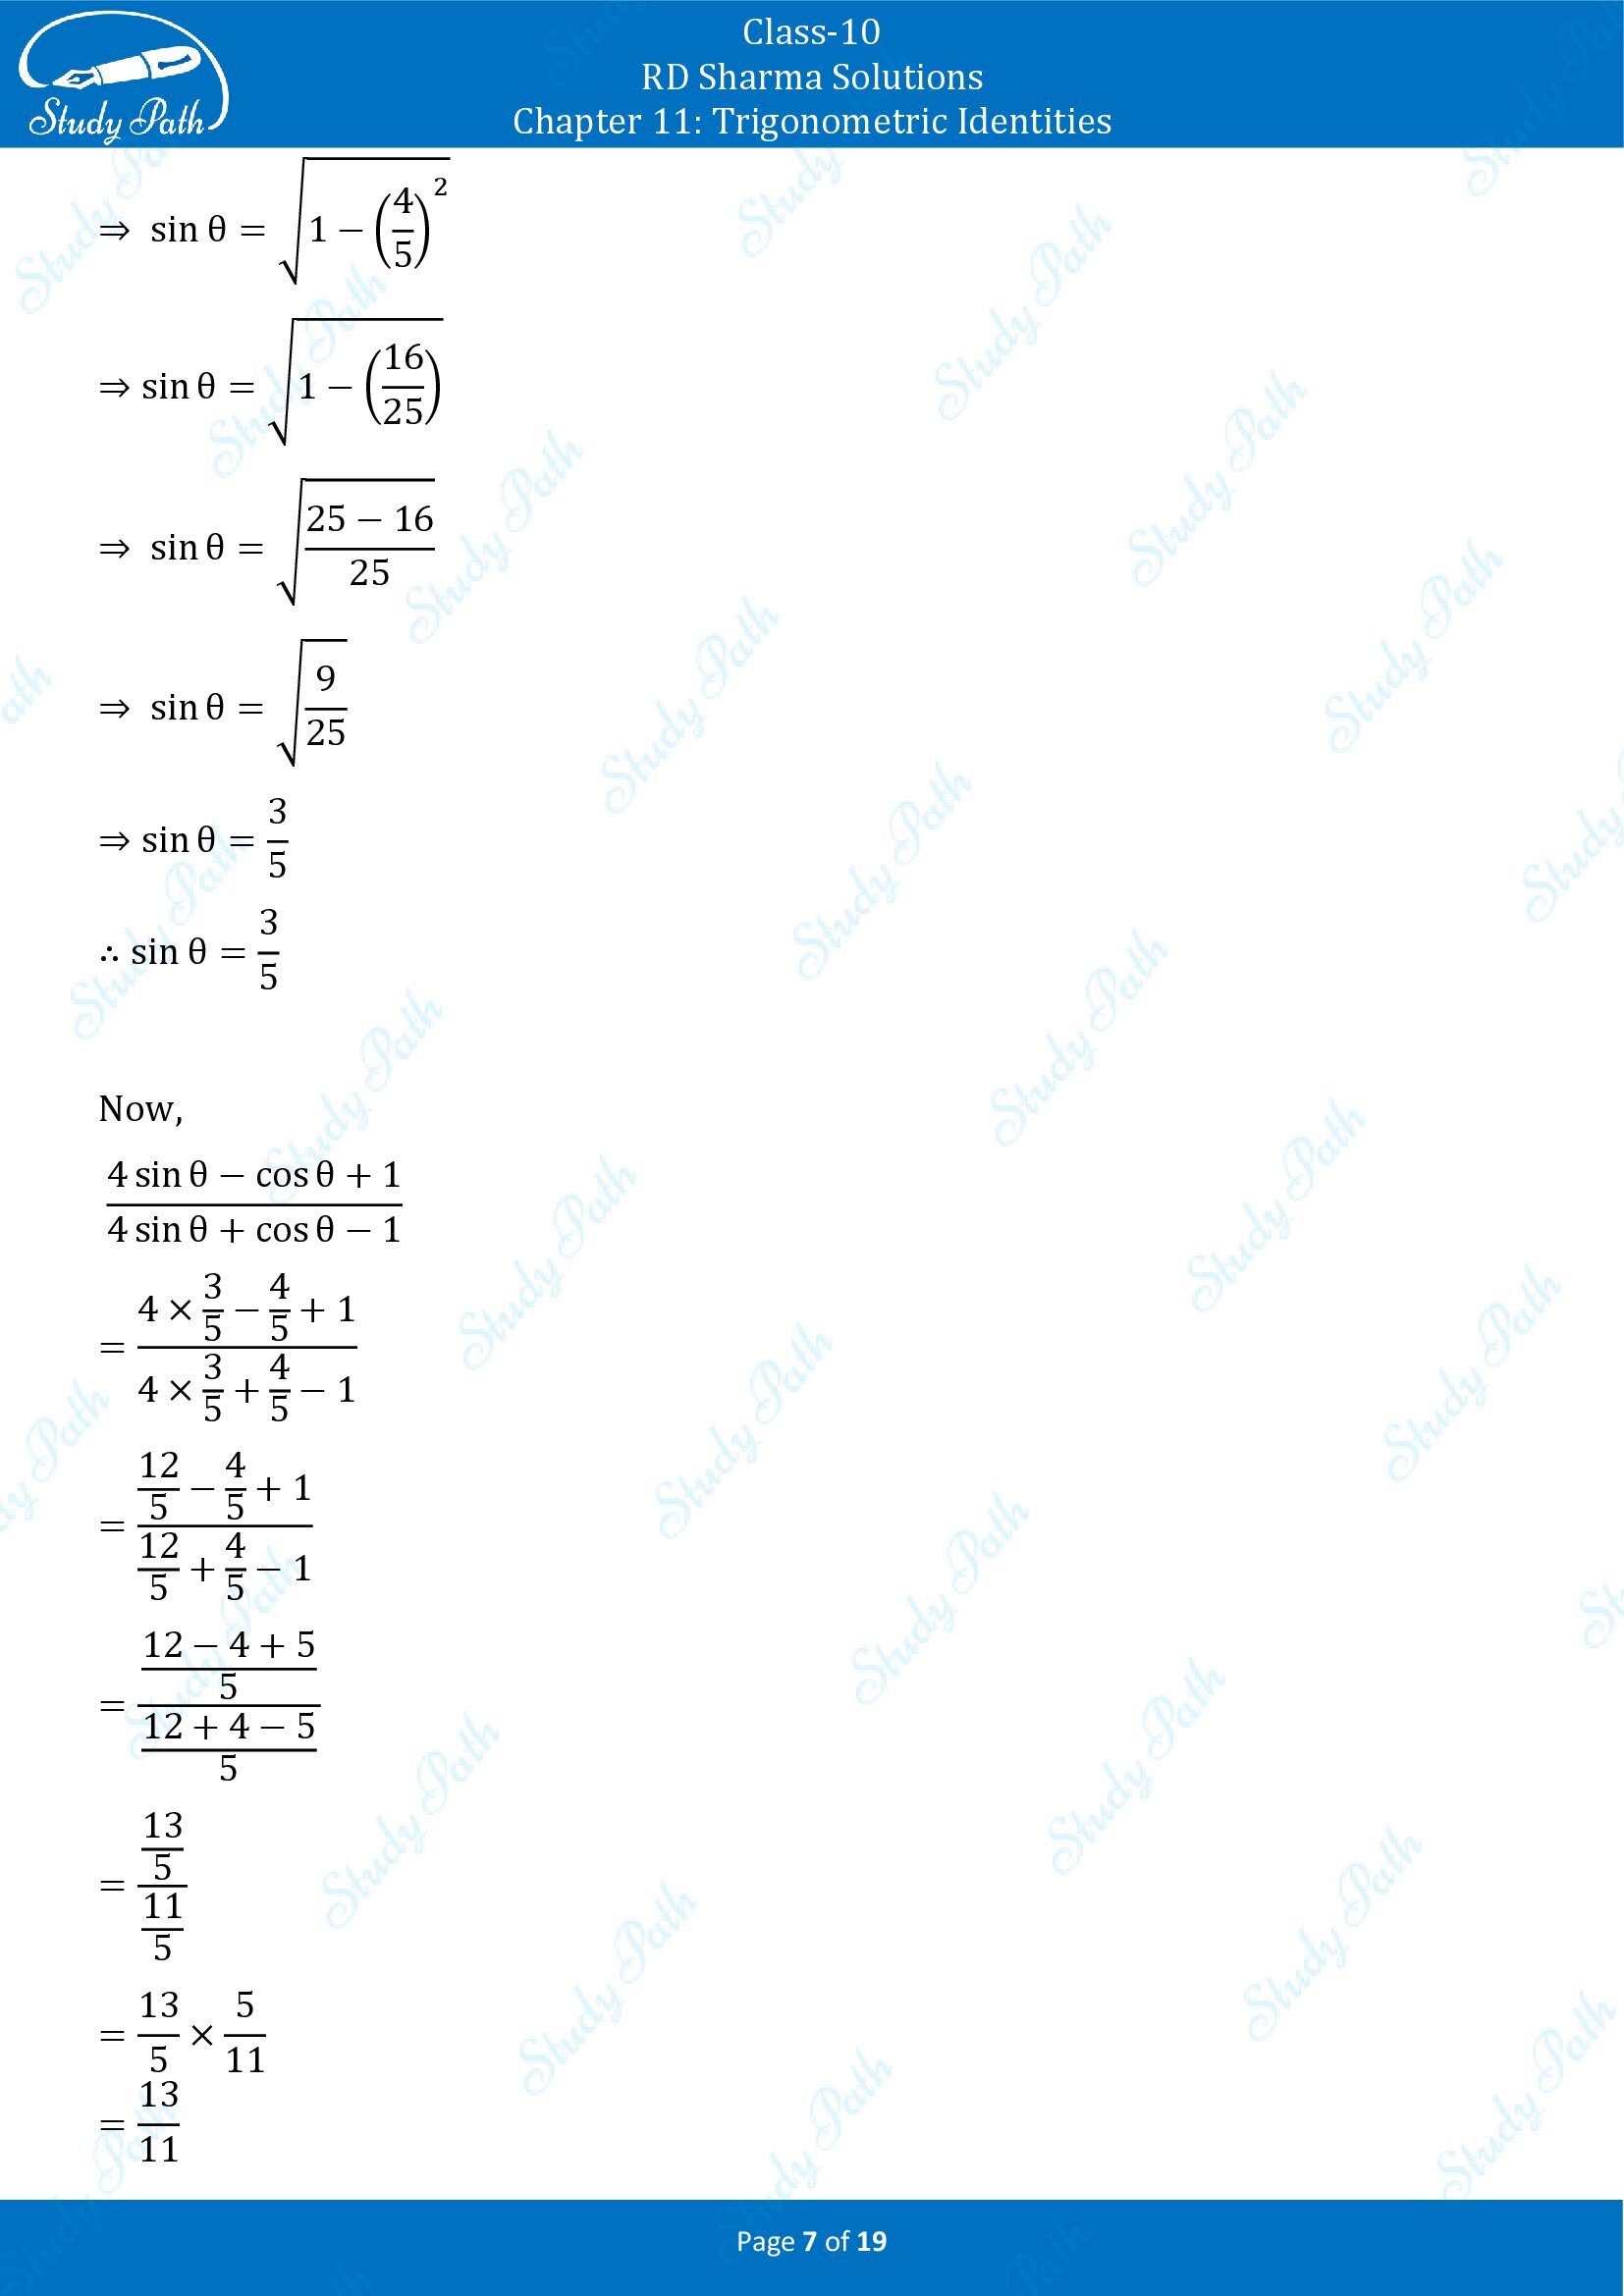 RD Sharma Solutions Class 10 Chapter 11 Trigonometric Identities Exercise 11.2 00007